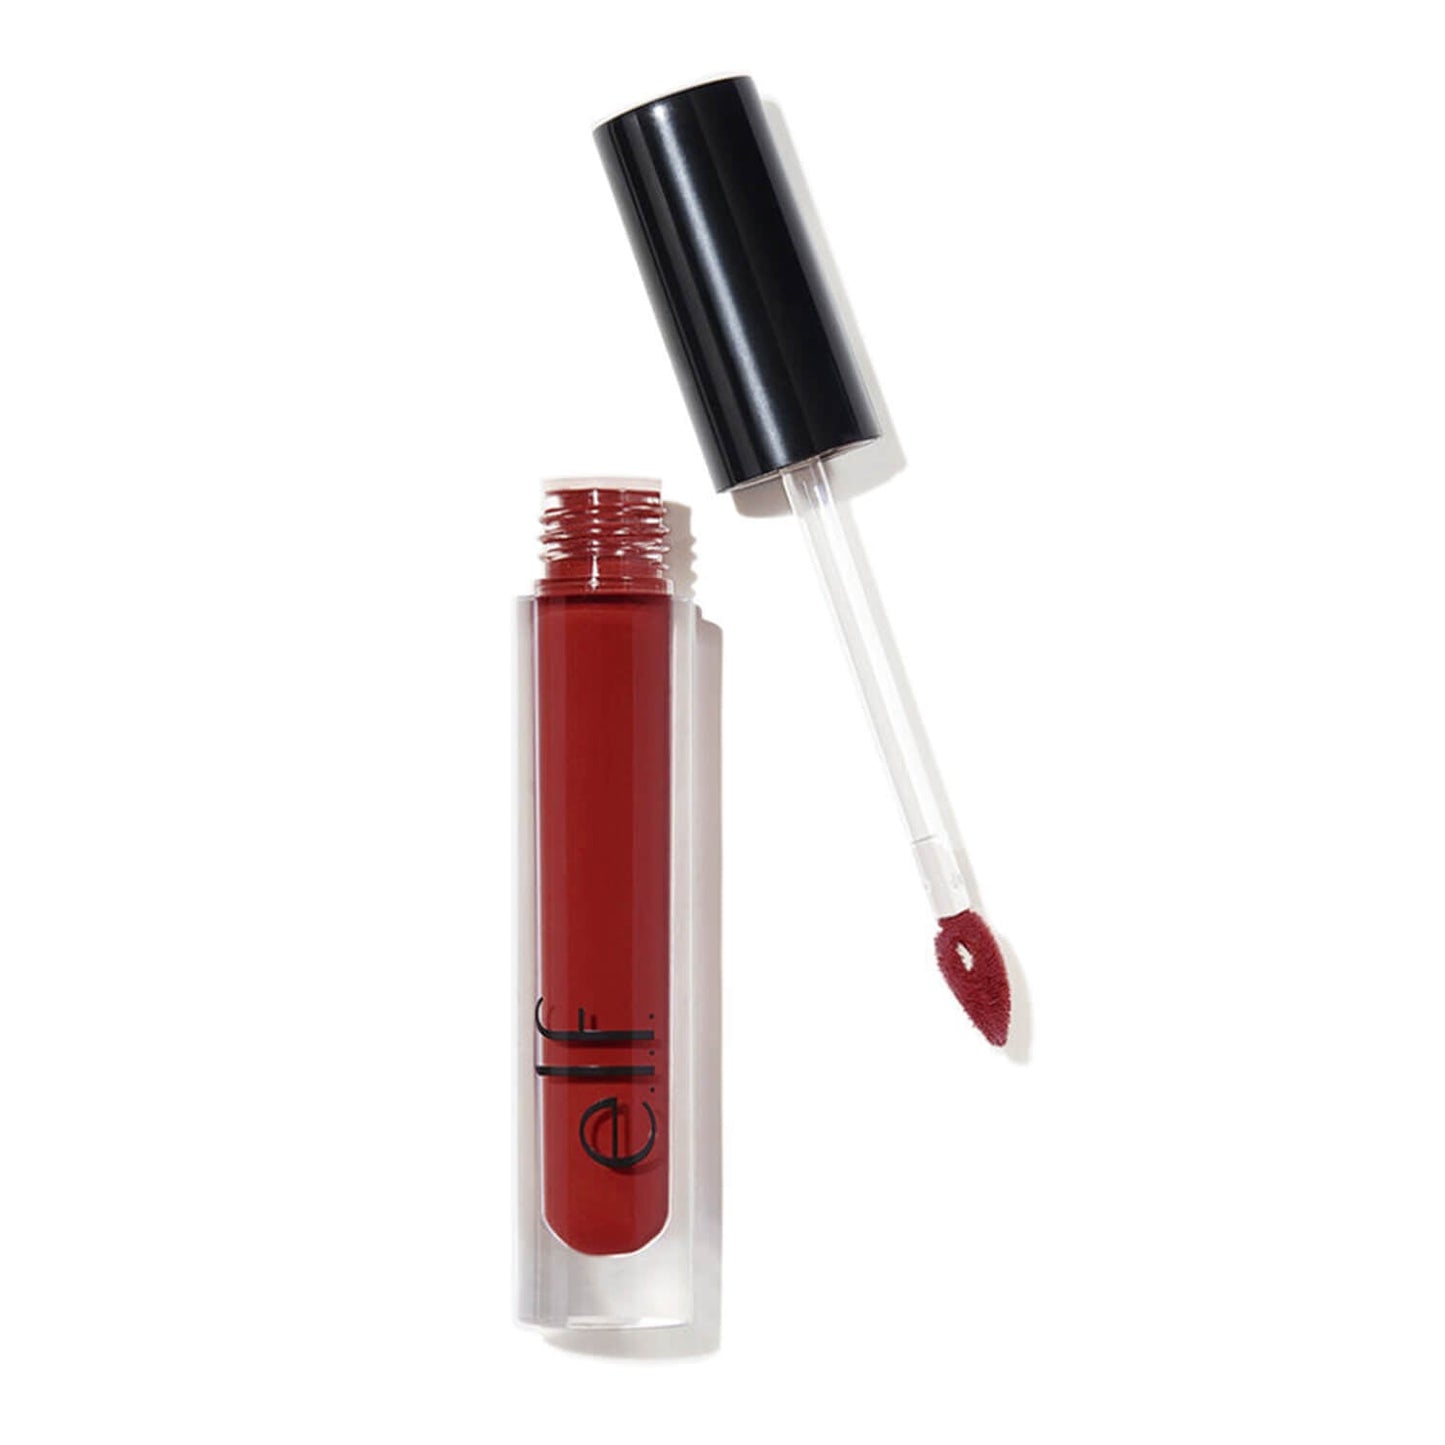 Shop Elf Liquid Matte Lipstick in red vixen shade available at Heygirl.pk for cash on delivery in Pakistan.